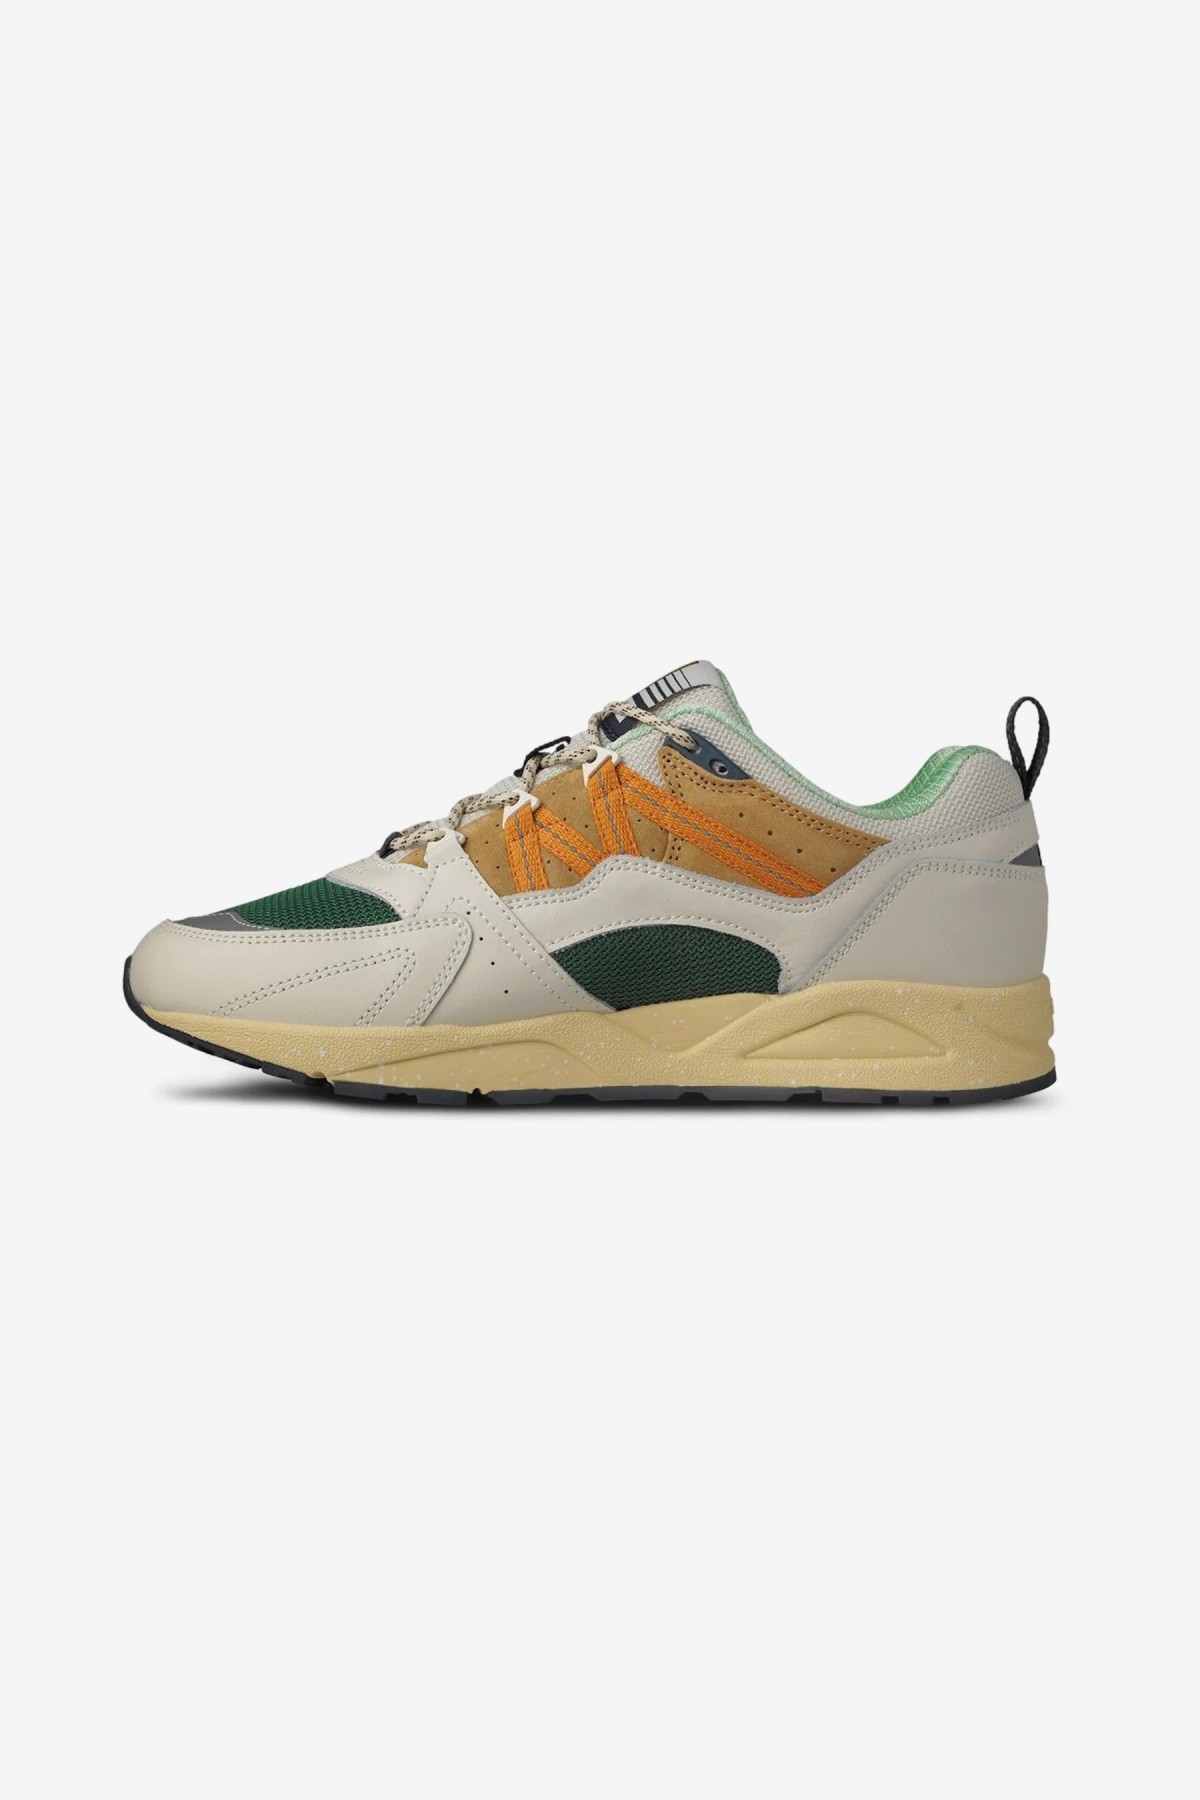 Karhu Fusion 2.0 in Lily White / Nugget